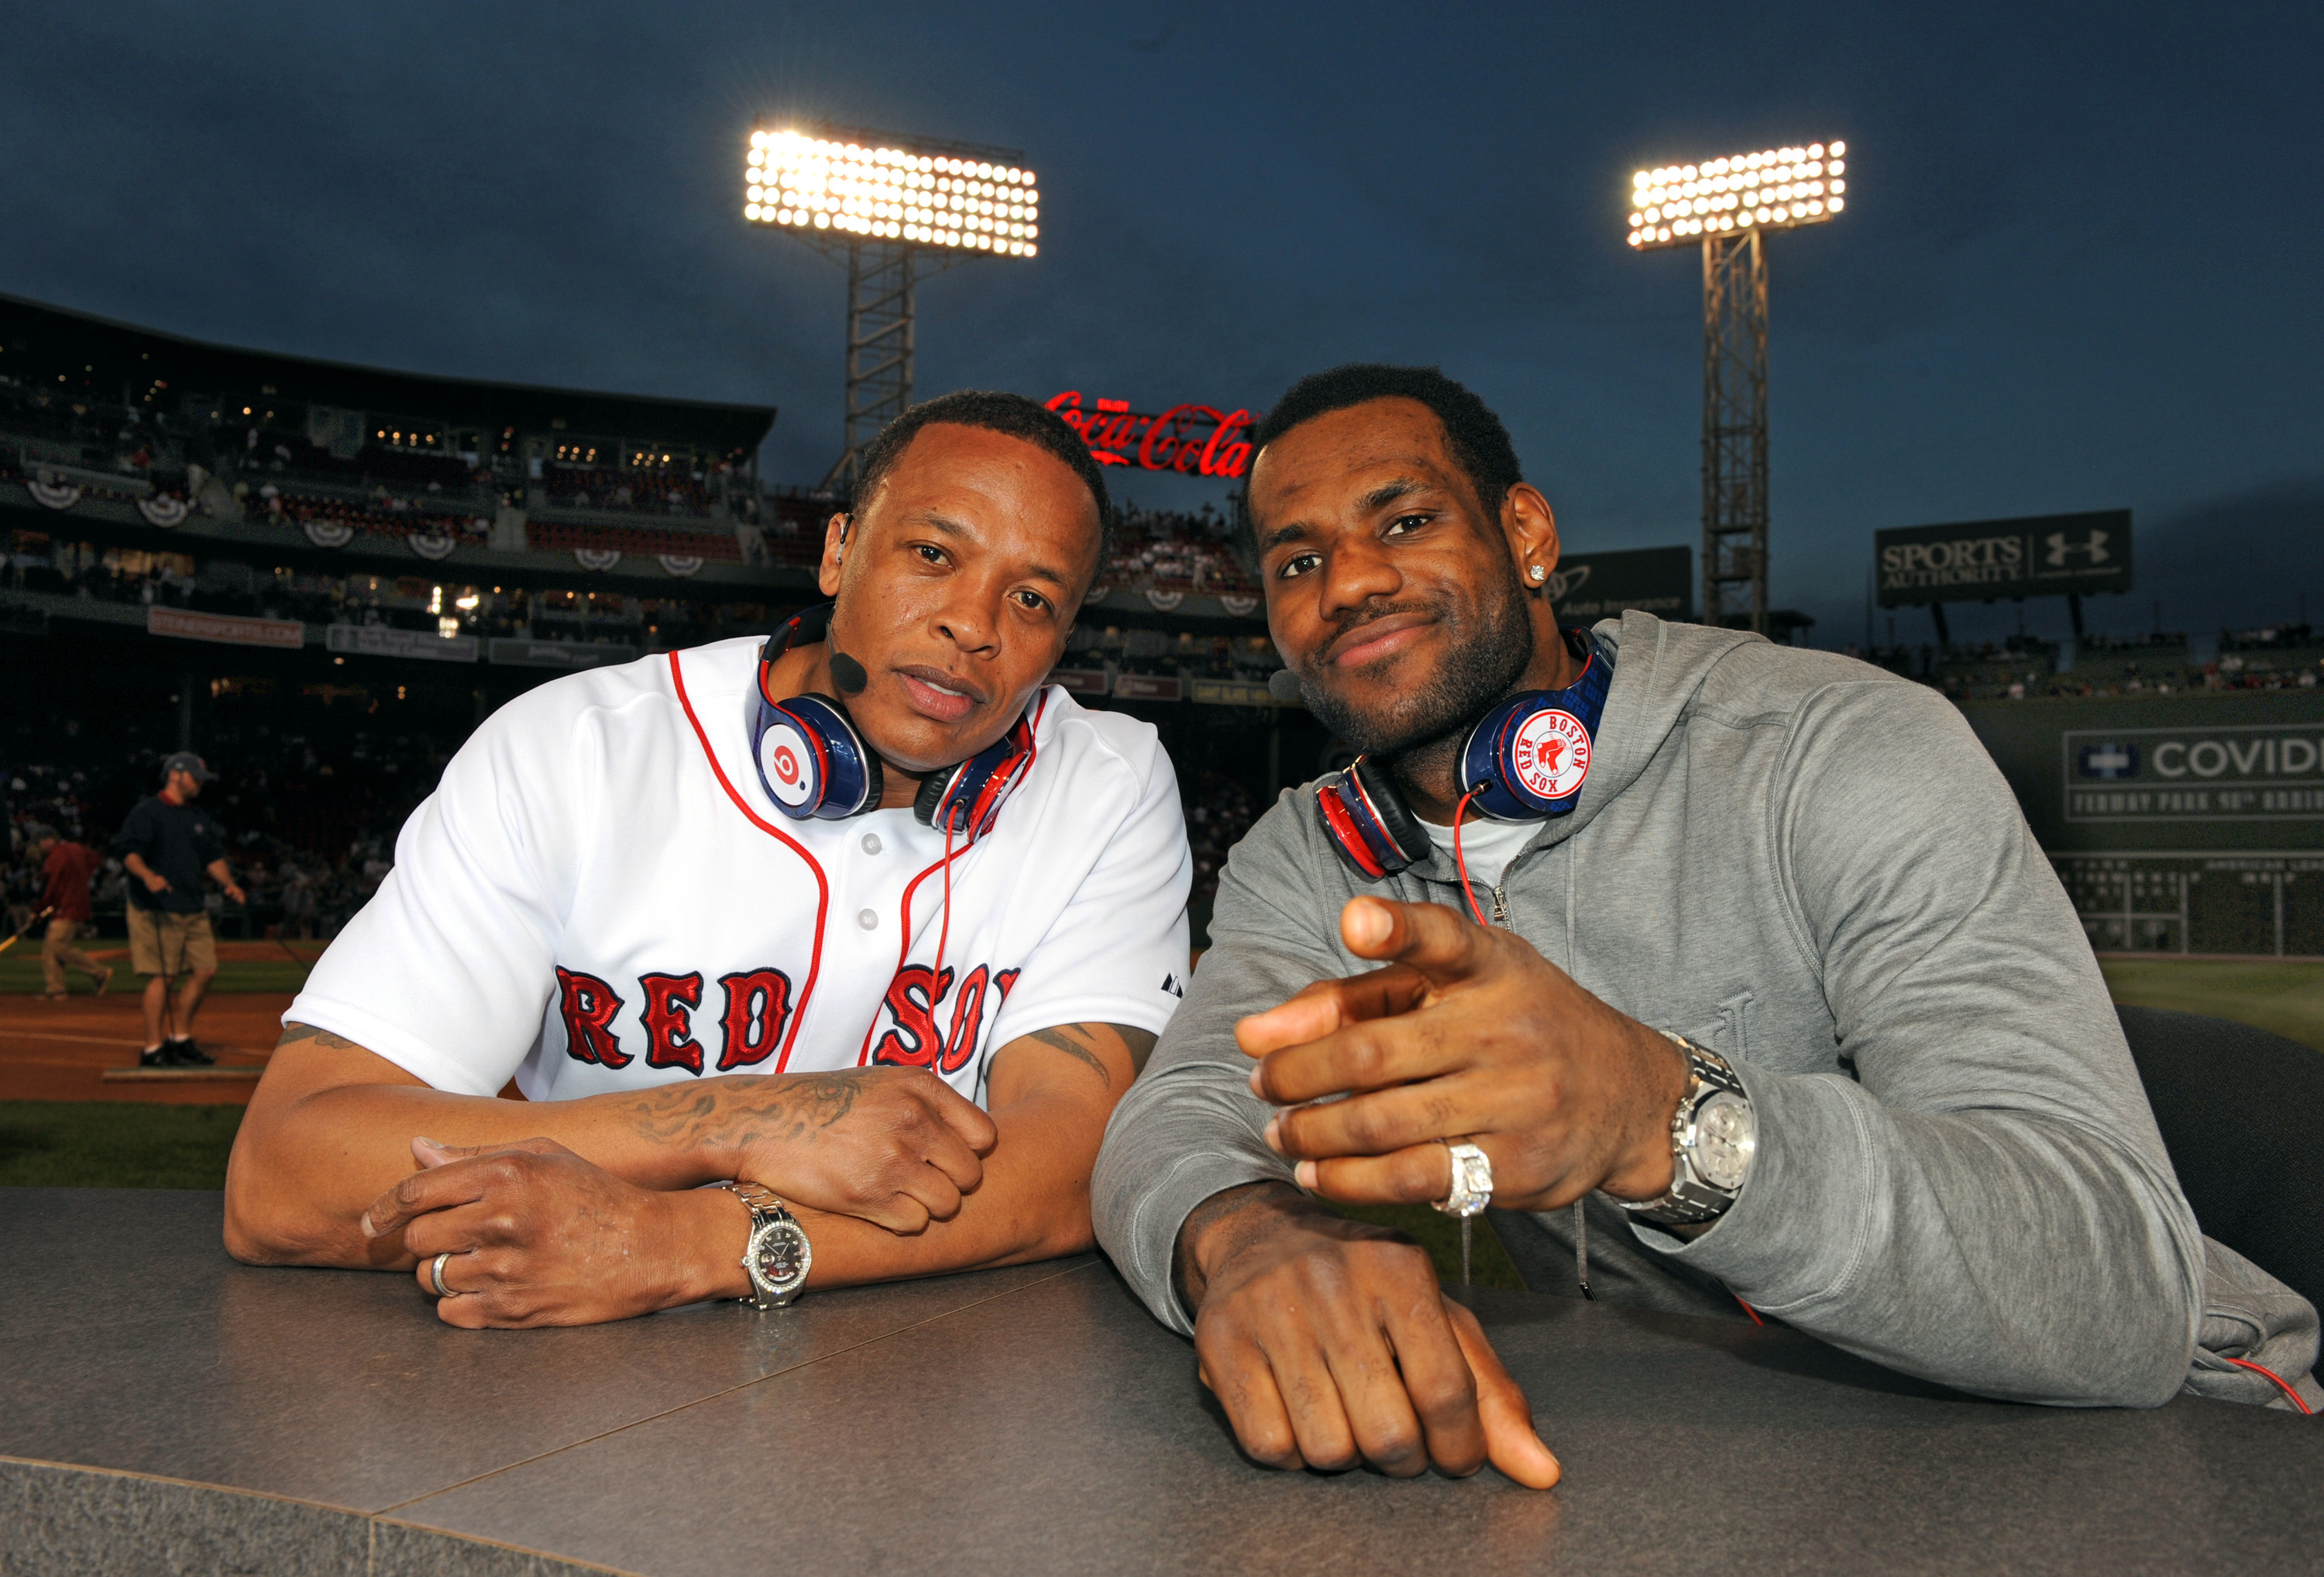 Lebron James and Dr. Dre on the field at Fenway Park